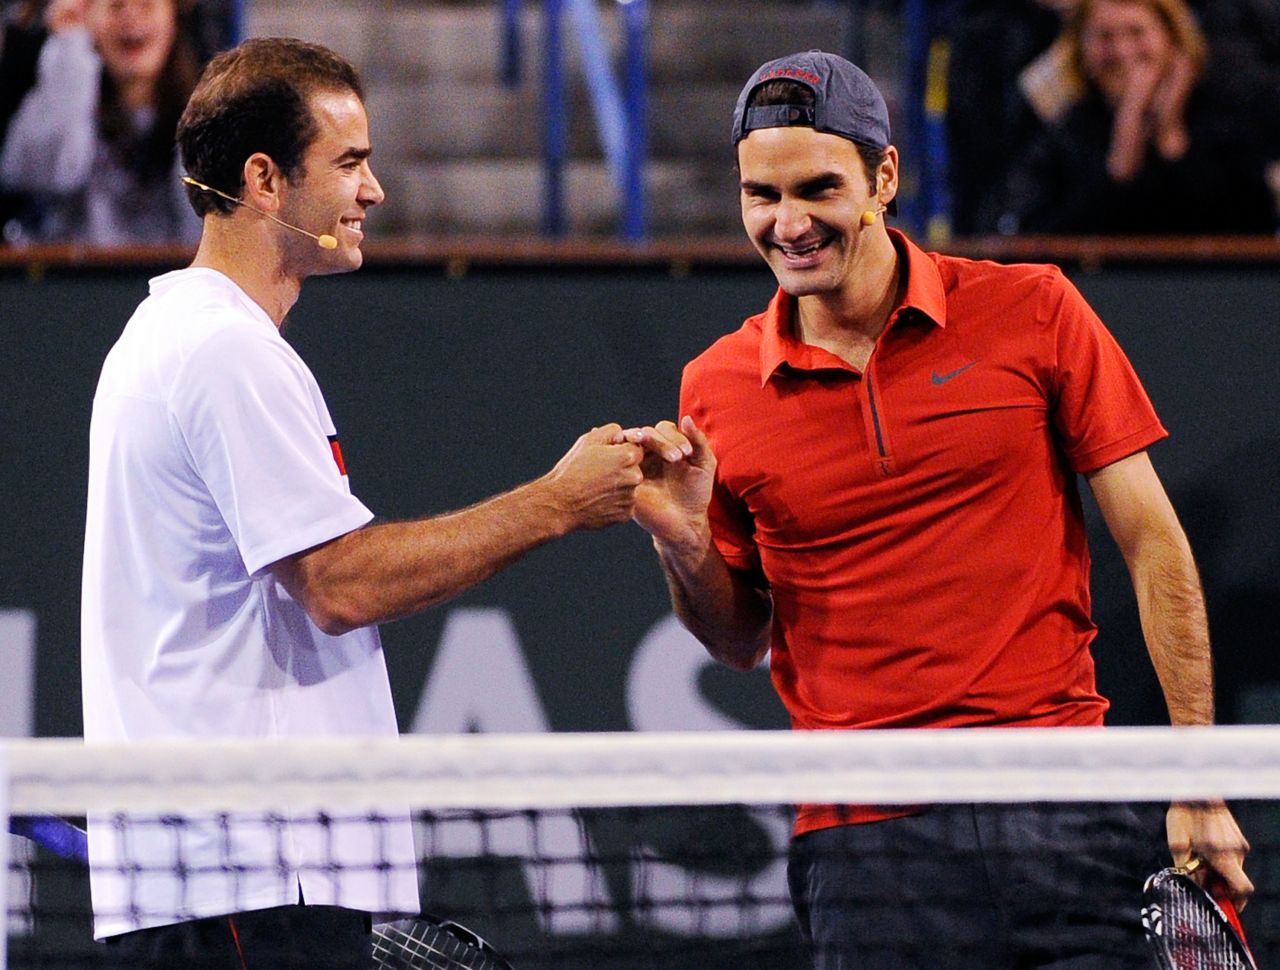 The year before, Sampras played an exhibition with Roger Federer, who has a record 16 grand slams but is still one short of the American's Wimbledon tally.